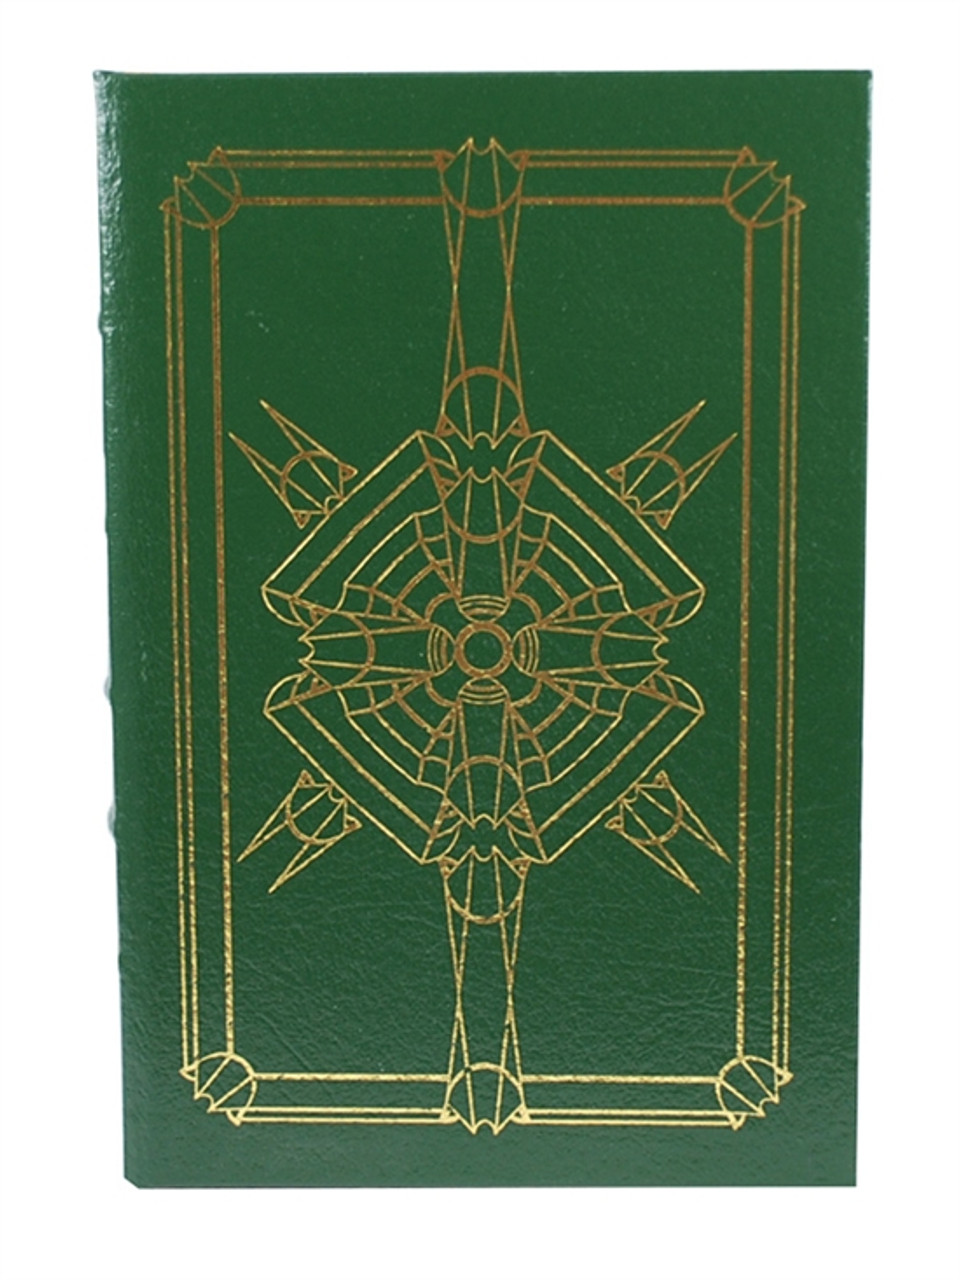 Easton Press "Halting State" Charles Stross, Signed First Edition of 900 Copies, Leather Bound [Very Fine]